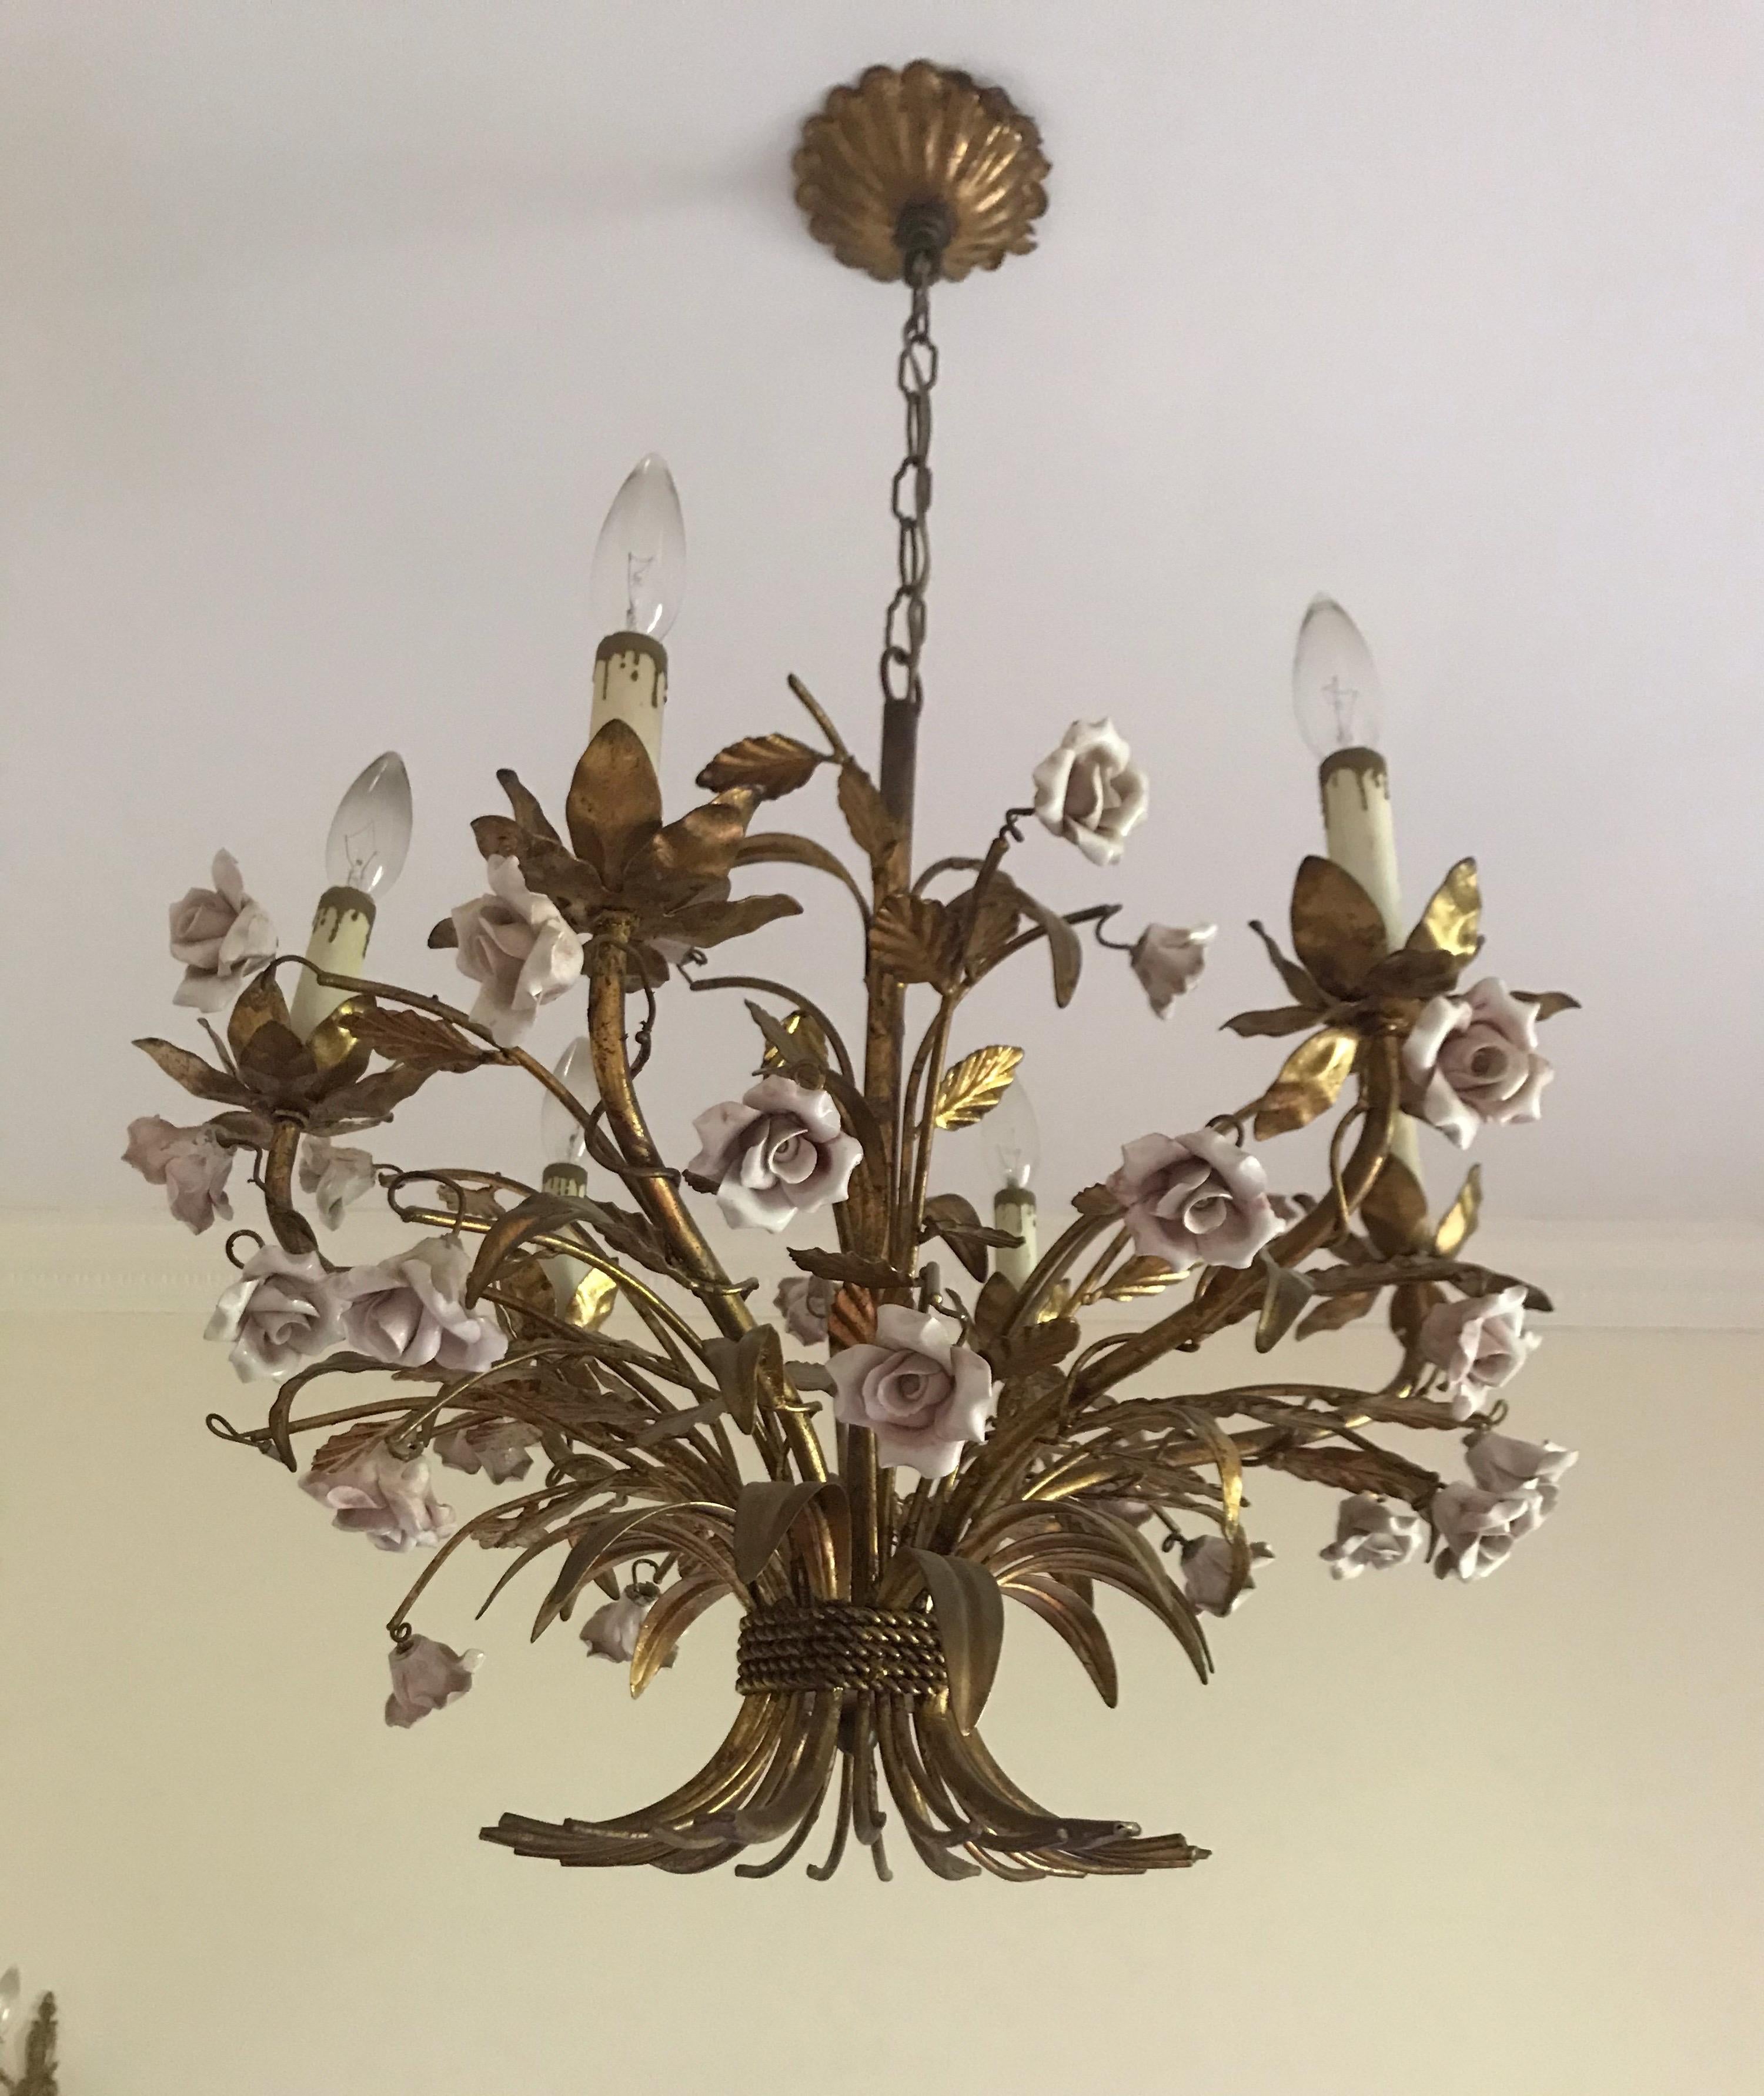 This stunning Italian gold gilt chandelier has a wheat shape shaft and the bottom flairs out with rope wrapped around. It has many gold leaves with beautiful soft pink porcelain roses. The original fluted canopy and chain are included and completes